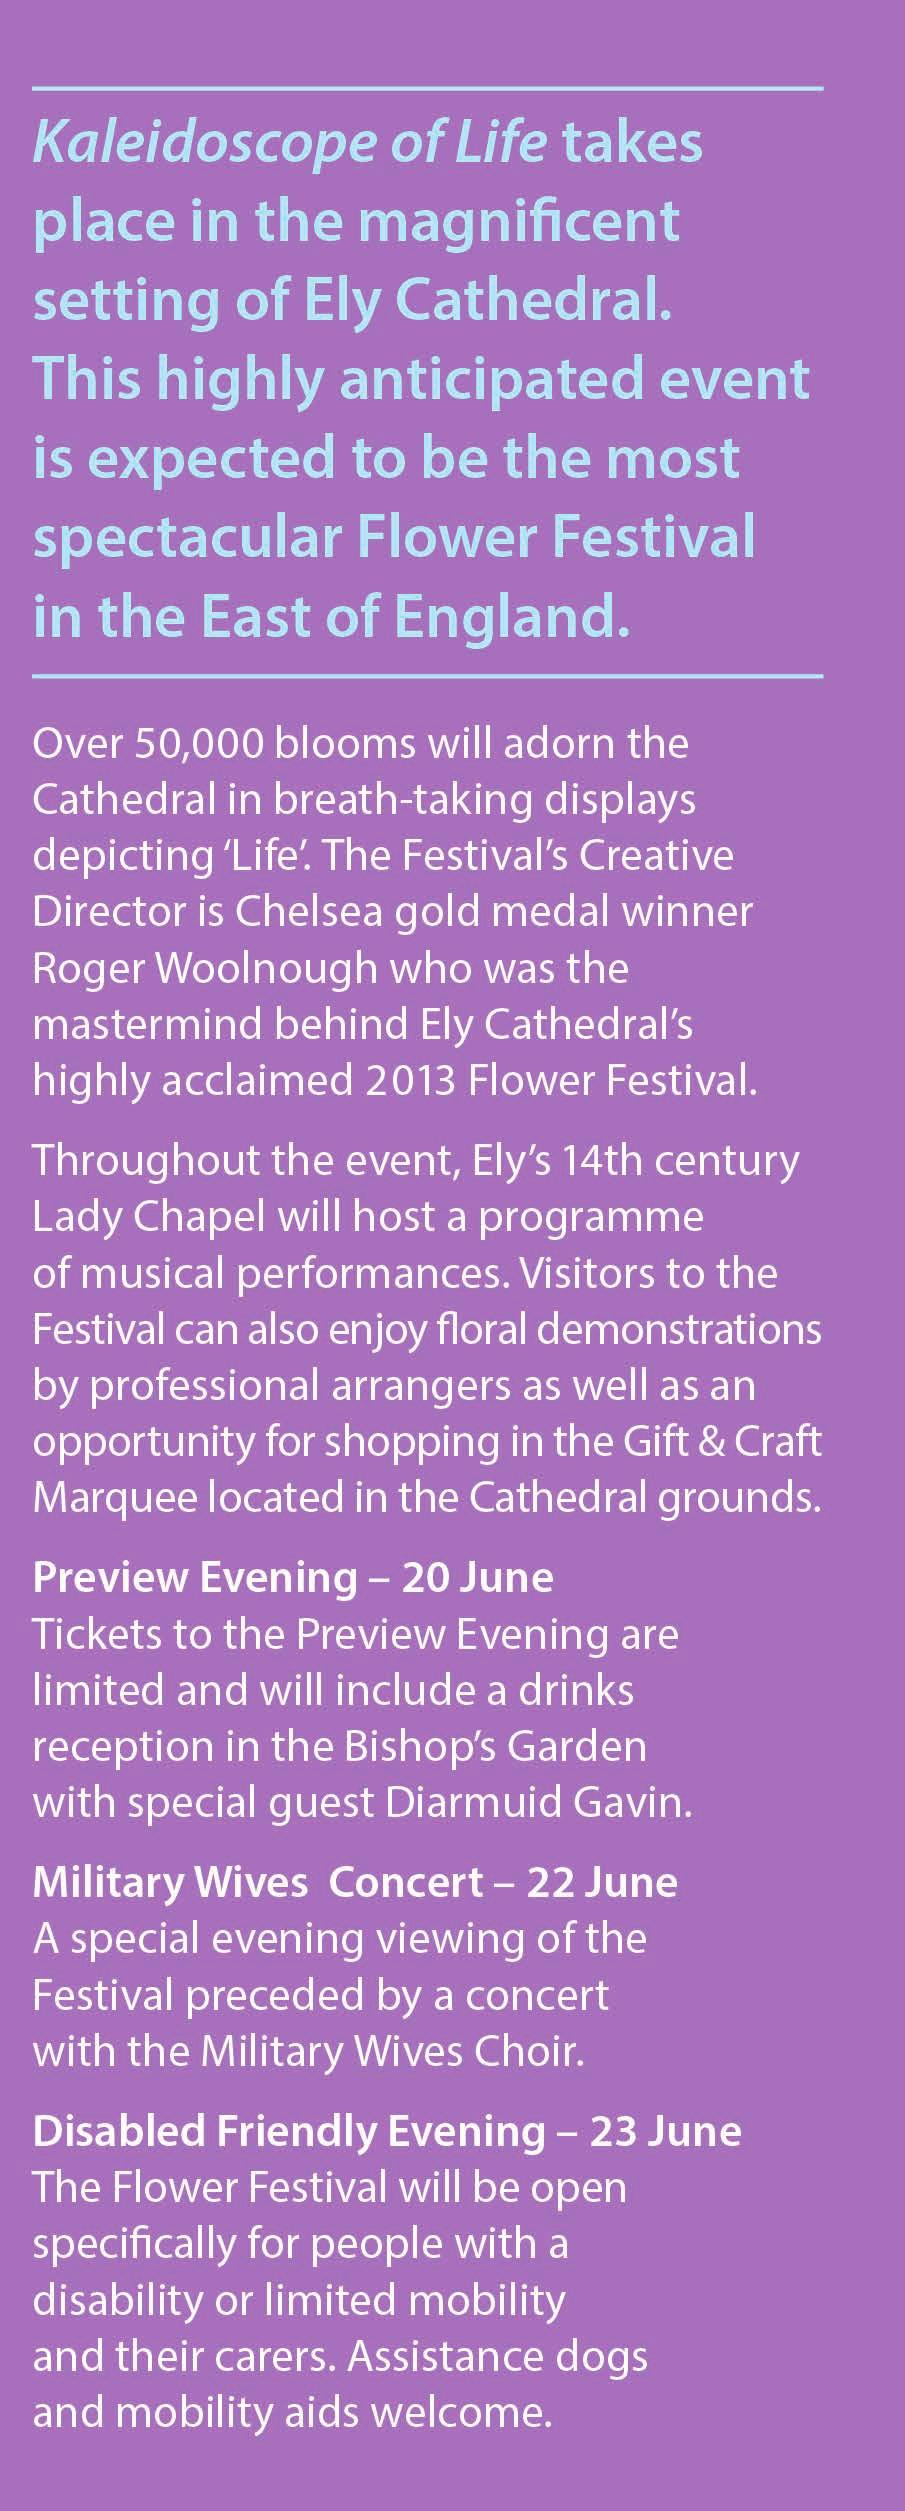 Kaleidoscope of Life takes place in the magniﬁcent setting of Ely Cathedral. This highly anticipated event is expected to be the most spectacular Flower Festival in the East of England.